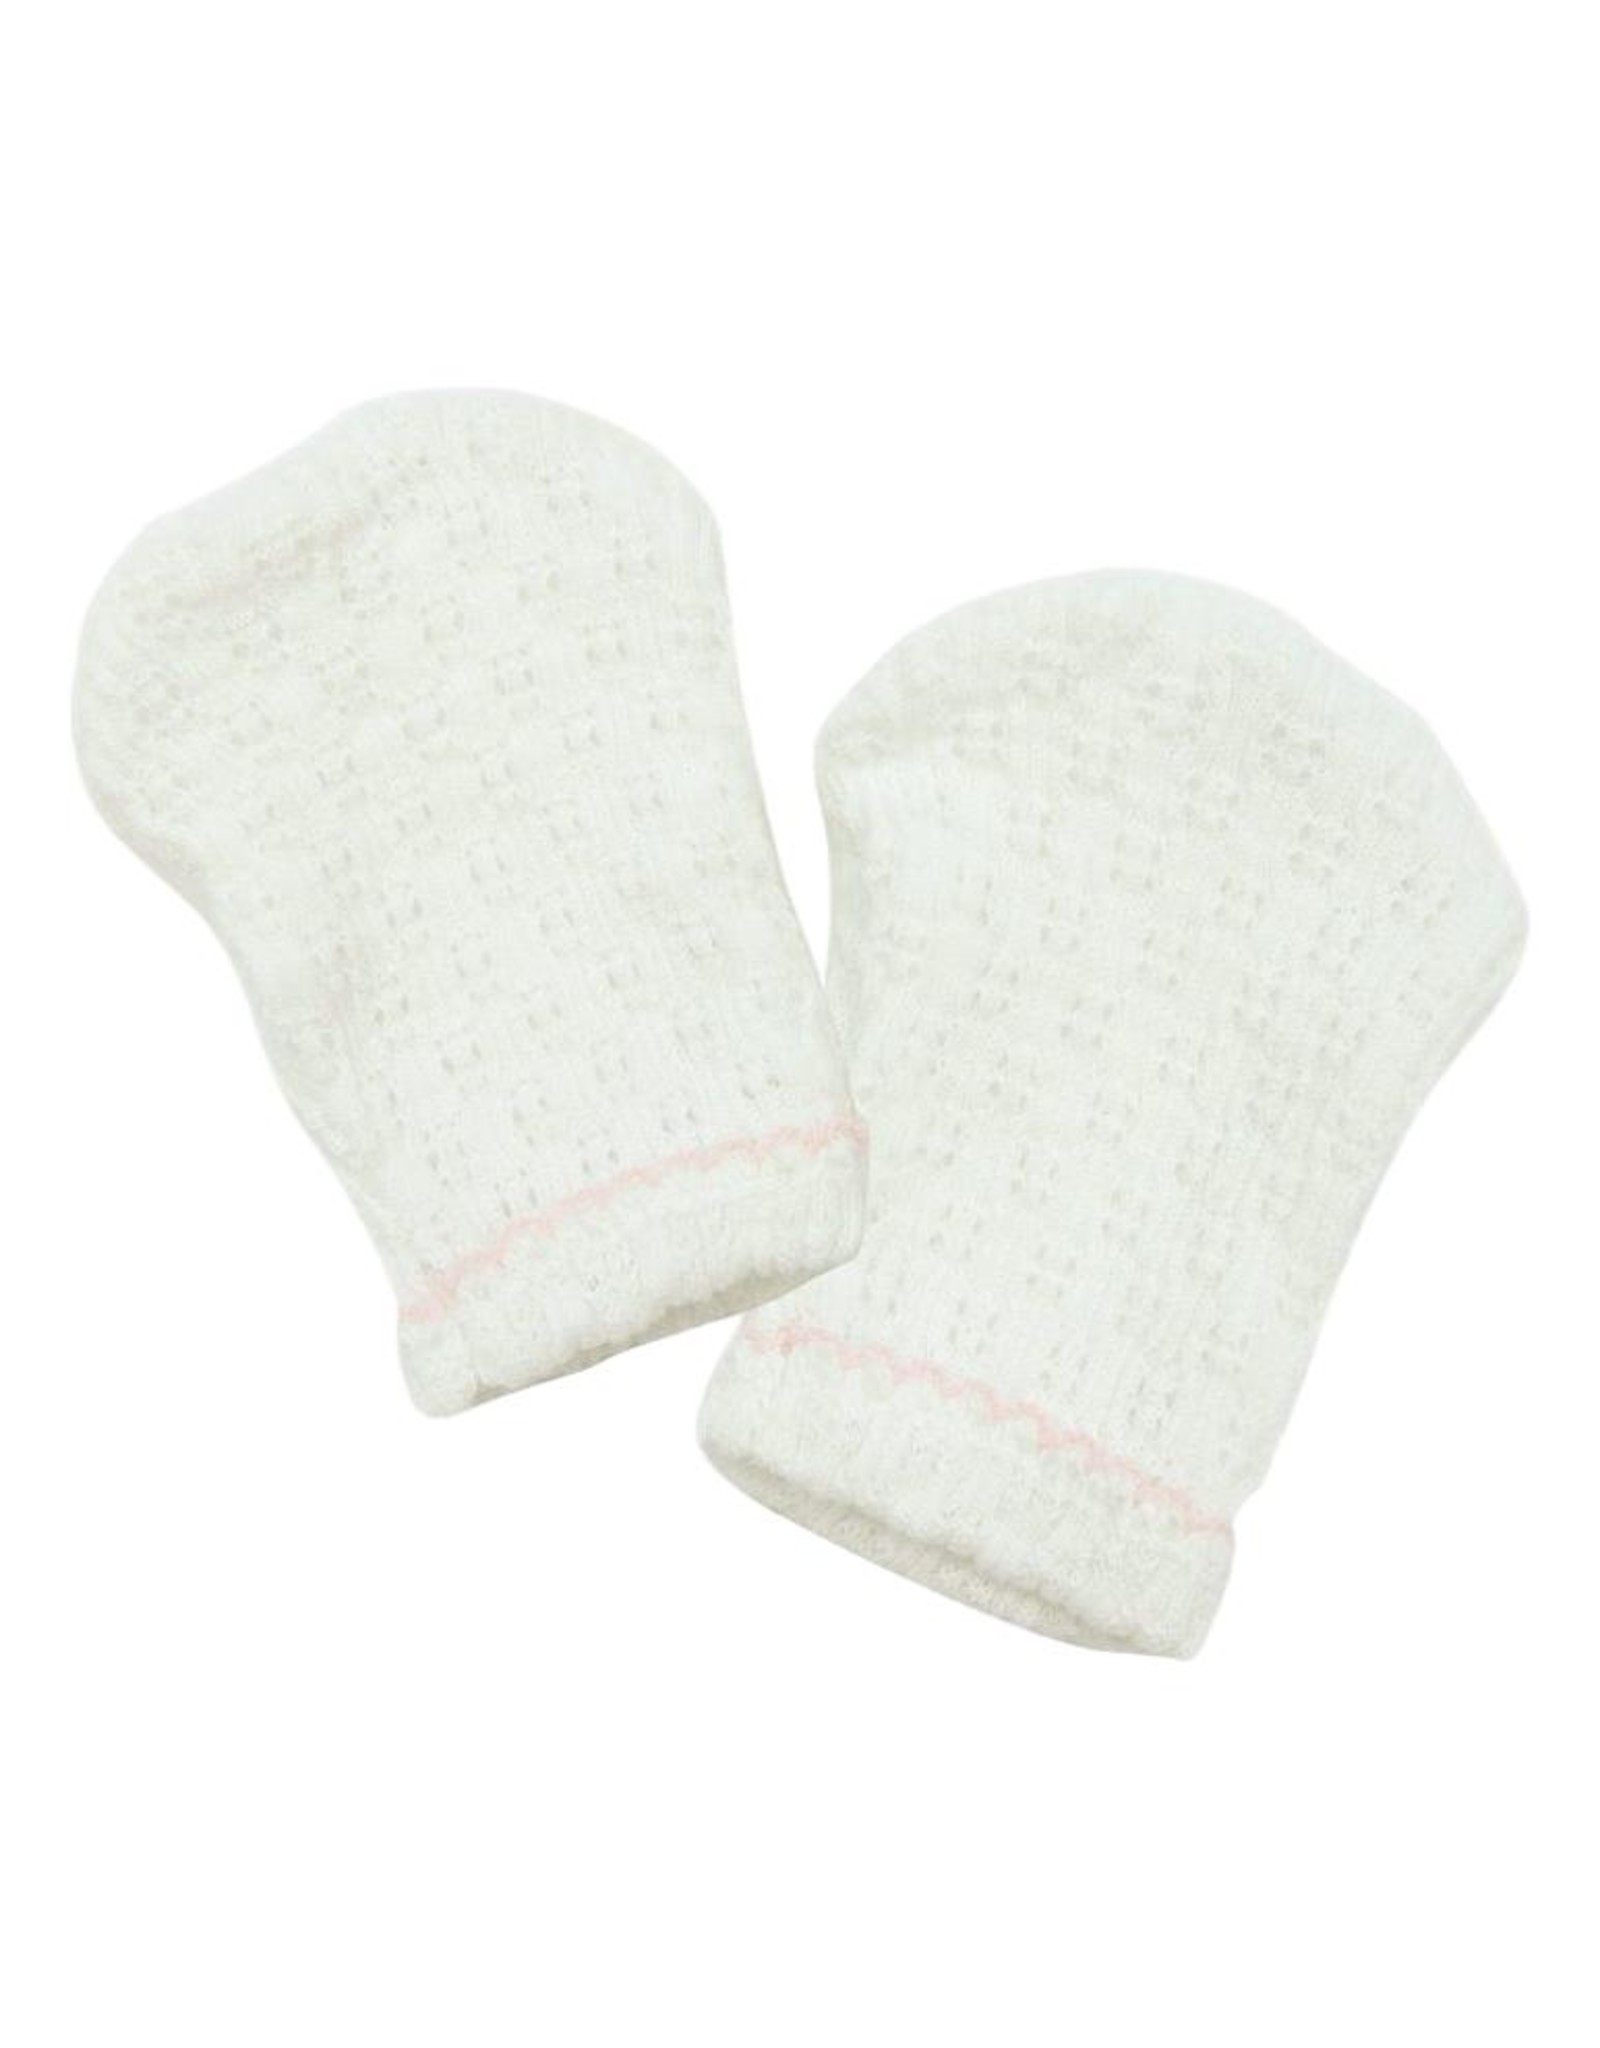 Paty, Inc. 188 mittens pink